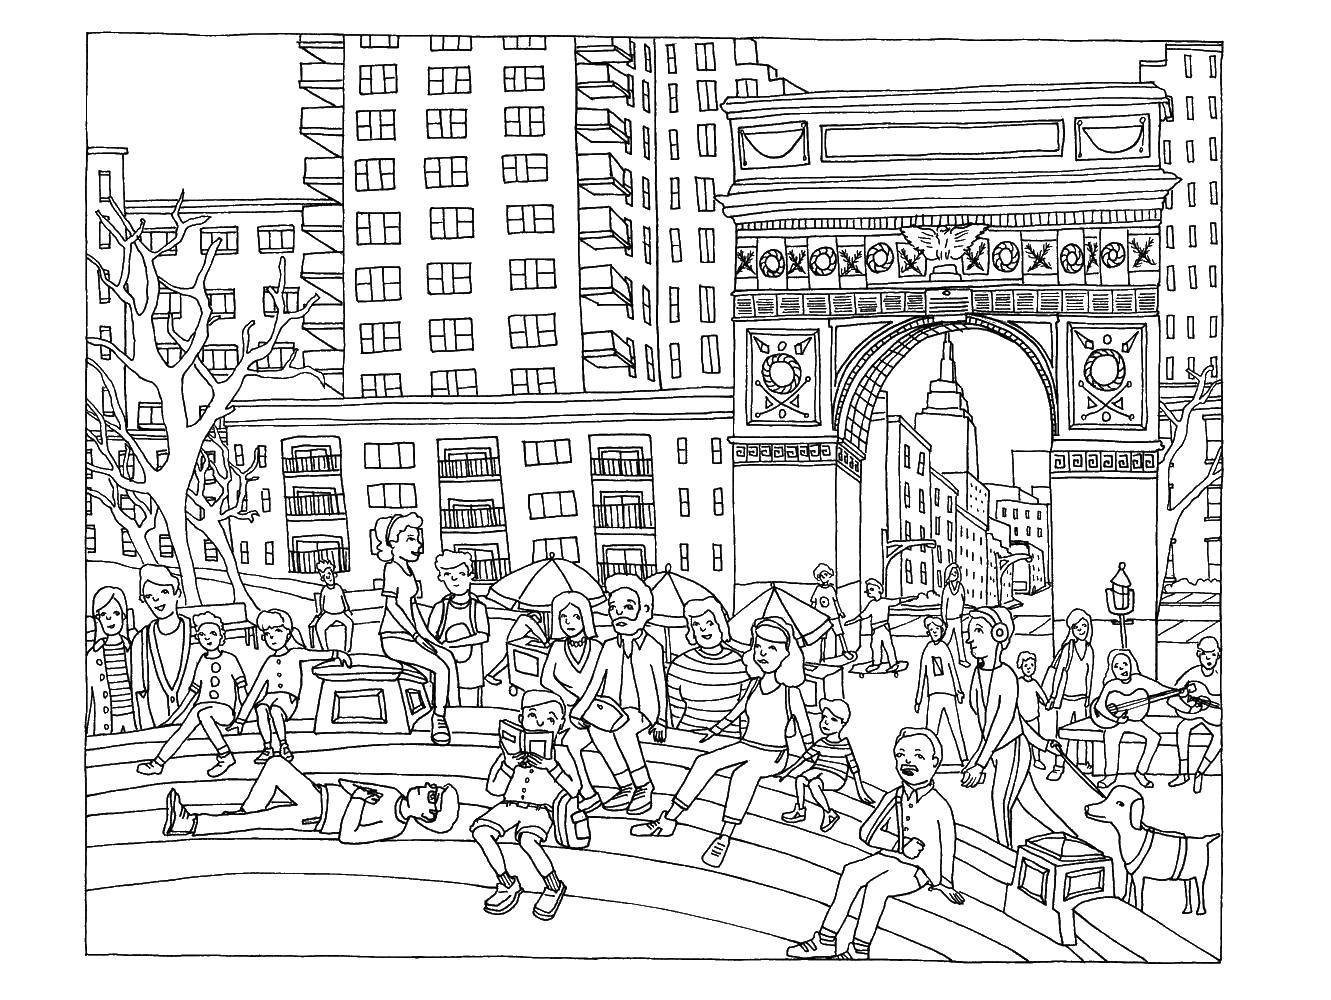 Coloring page captivating city of voronezh